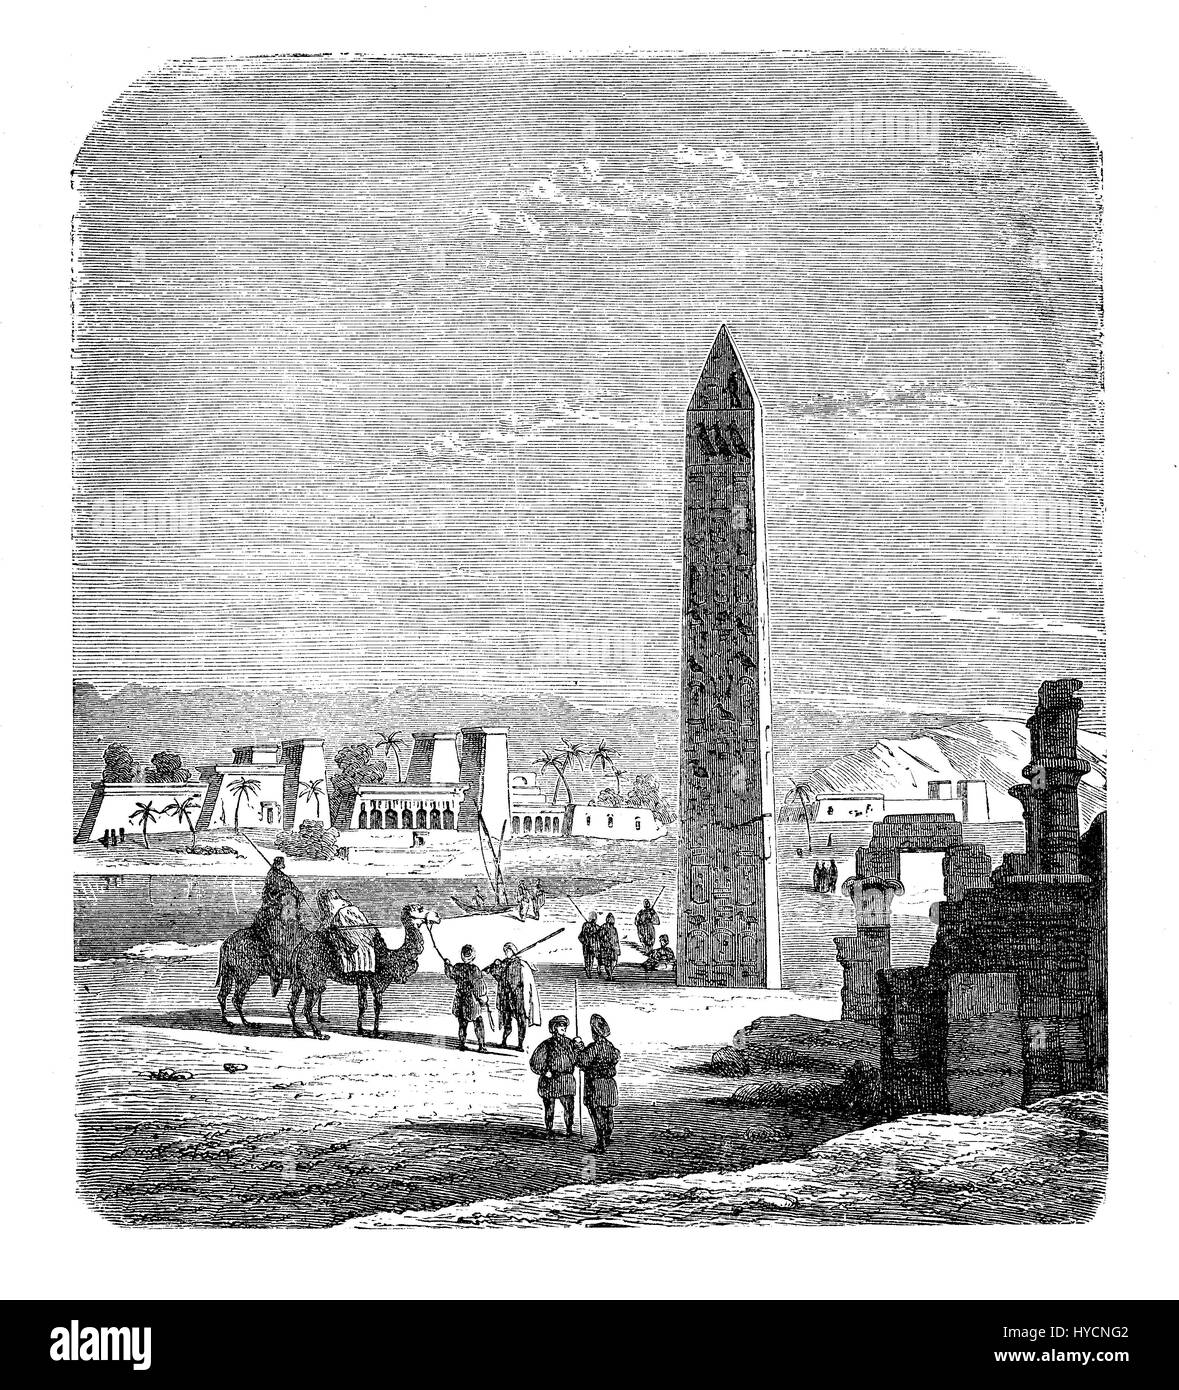 XIX century engraving describing in a romantic view of way of life and costumes in Egypt: people traveling on camels in the desert with the view of an obelisk, antique temples and ruins Stock Photo